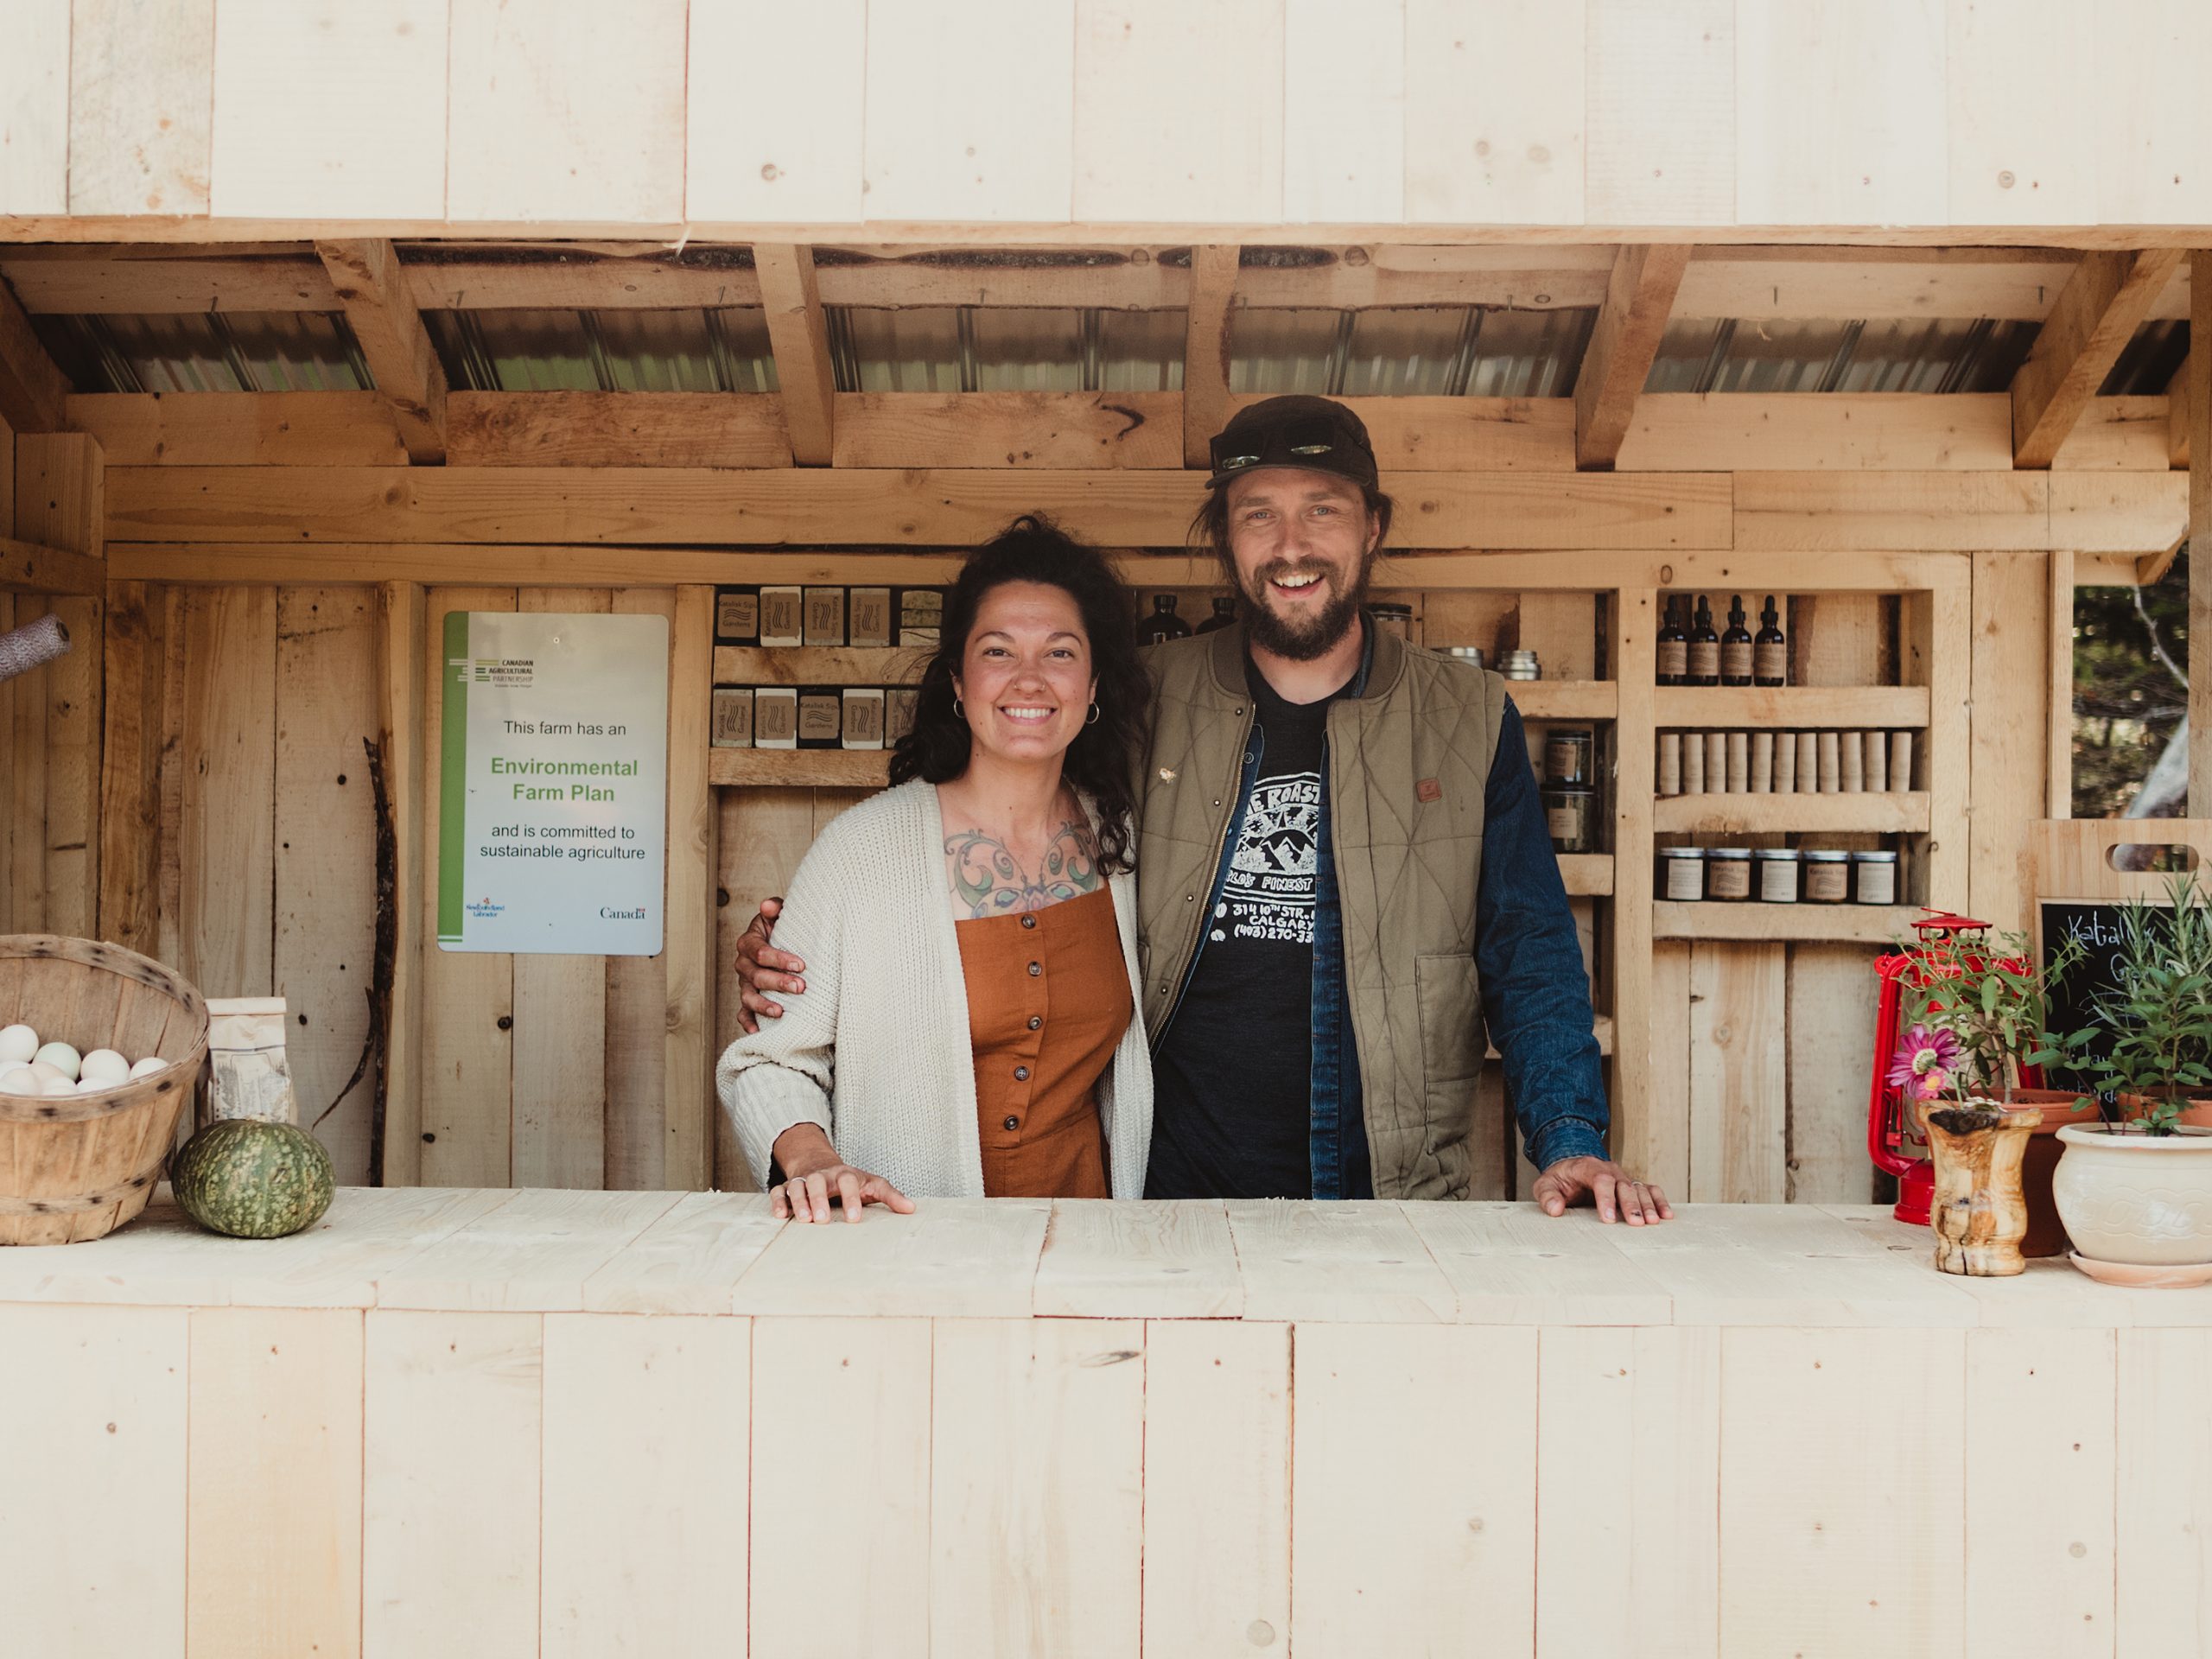 A life-long dream: Megan Samms and partner Ash Hall envision a community-based studio, workspace and place to house community art events in scenic Codroy Valley, Newfoundland and Labrador. Photo: Kirsten Pope